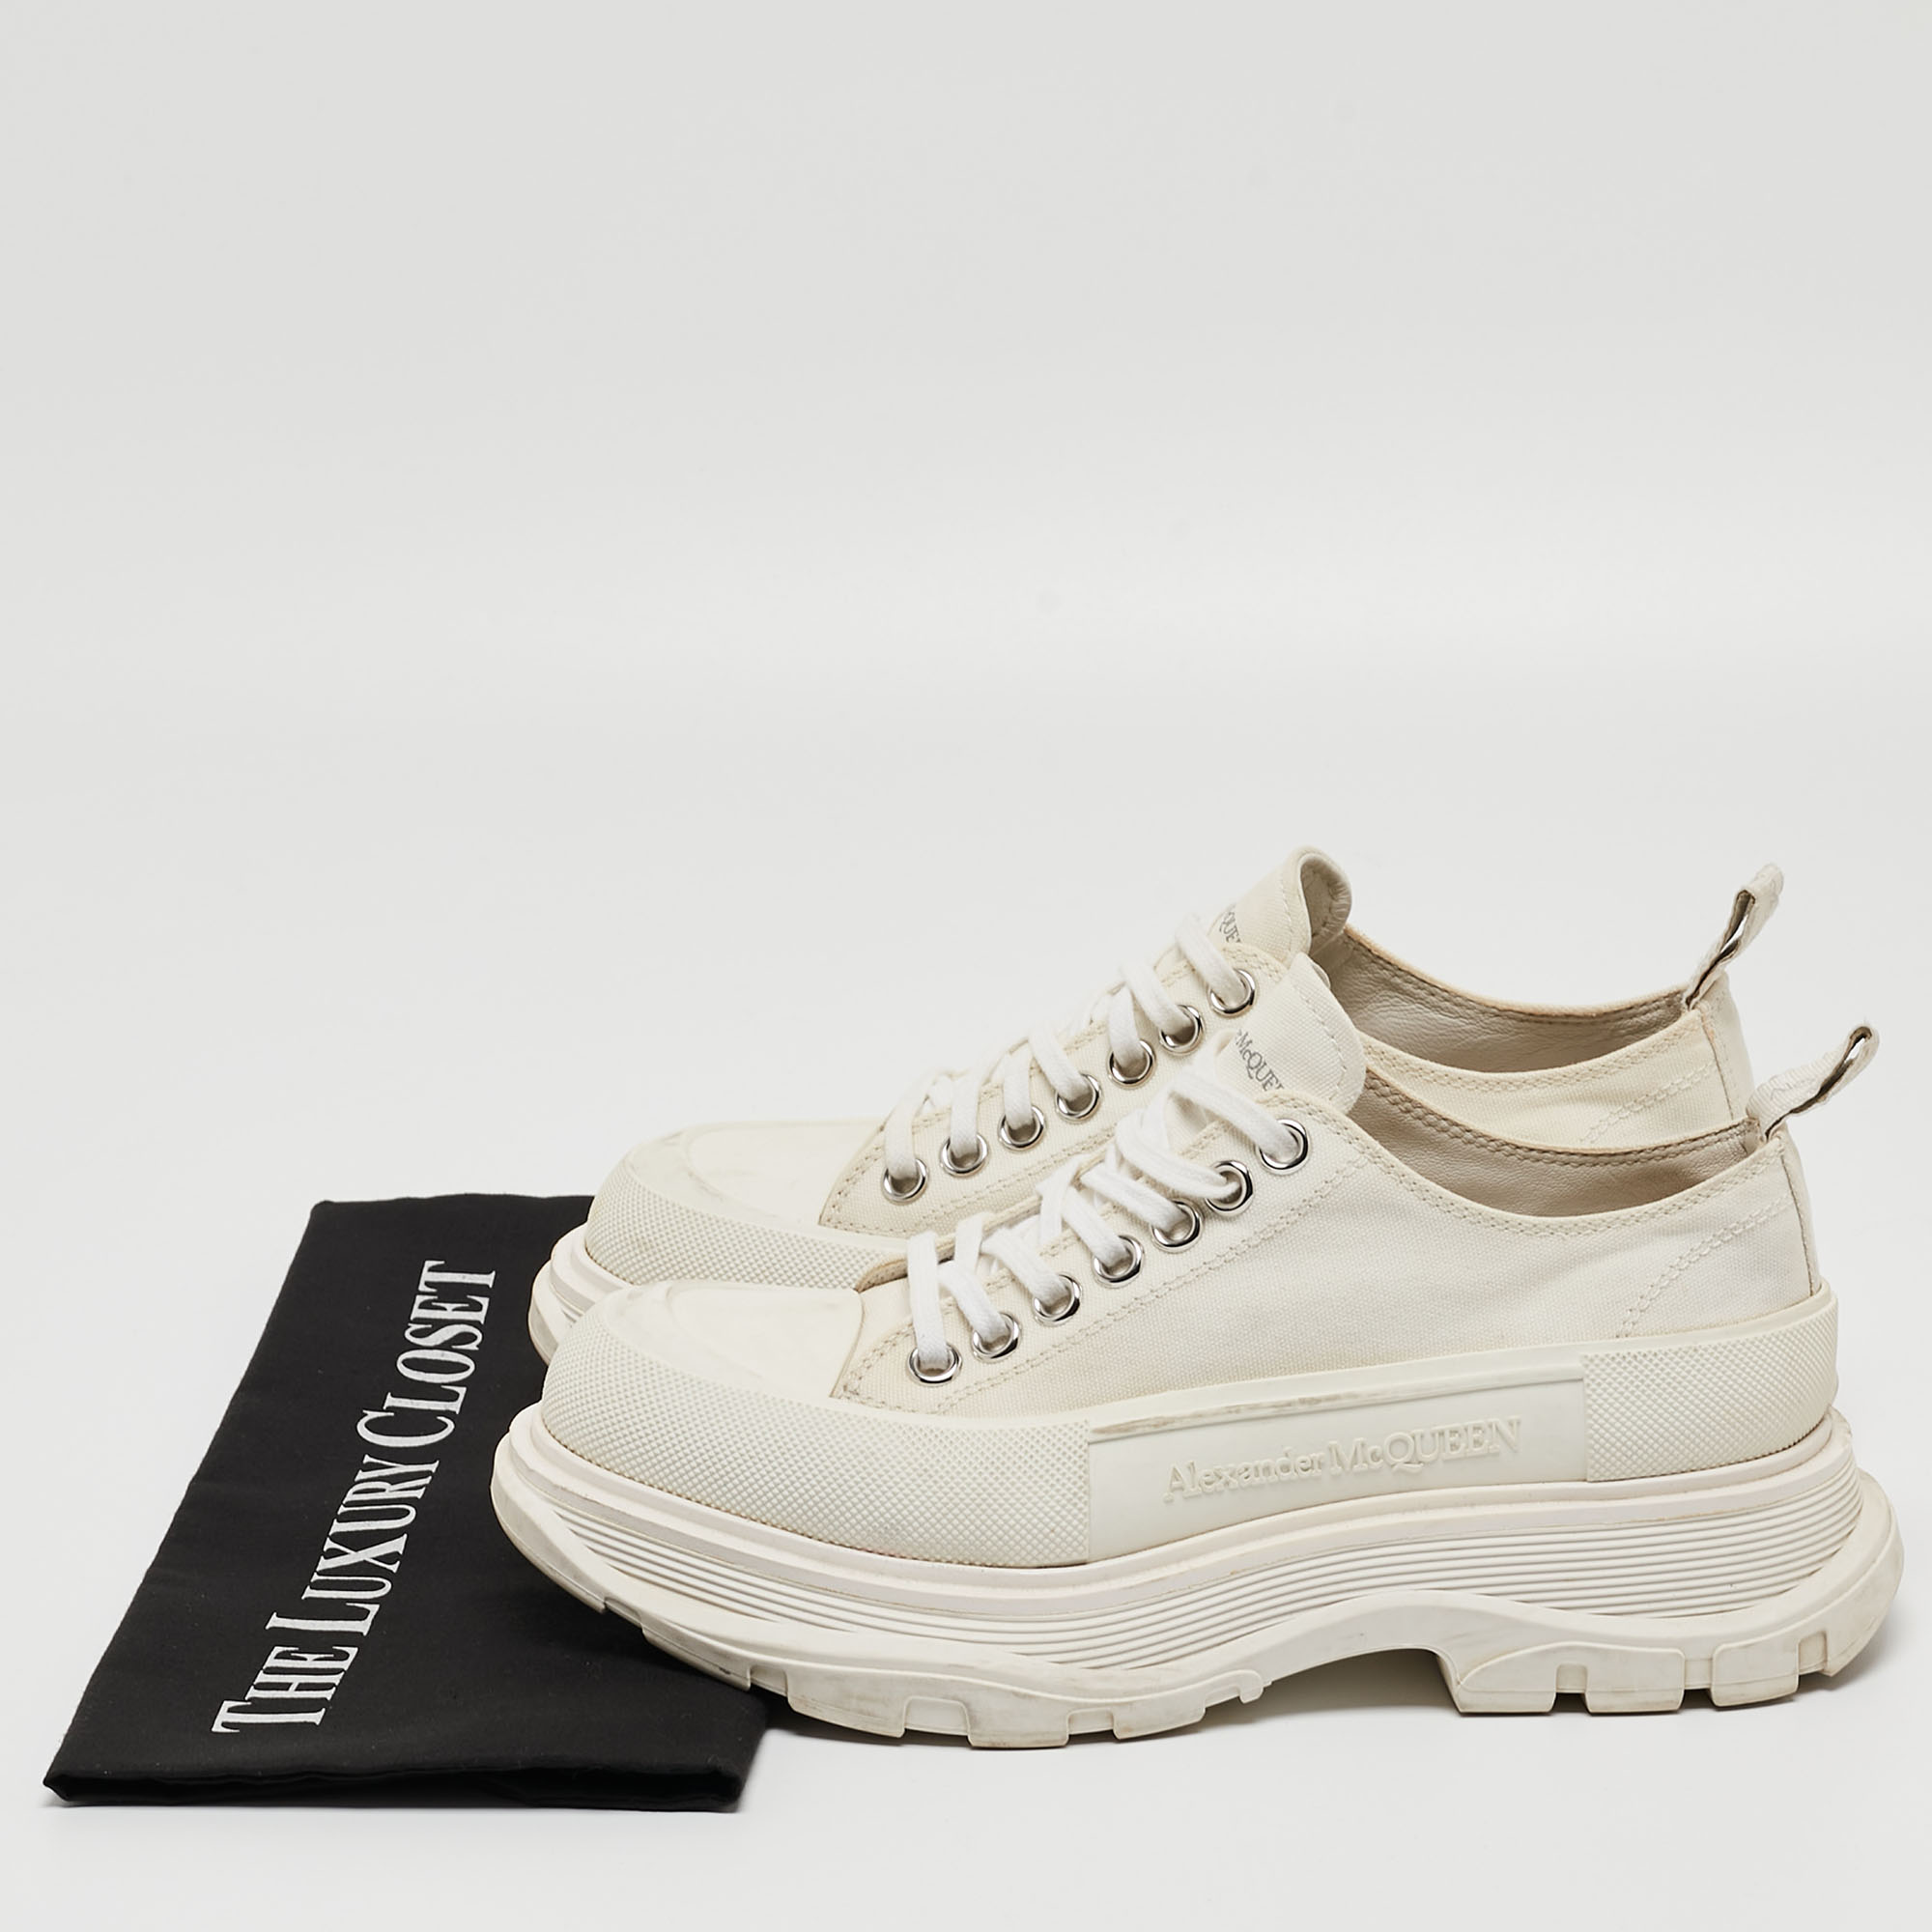 Alexander Mcqueen White Canvas And Rubber Tread Slick Sneakers Size 38.5